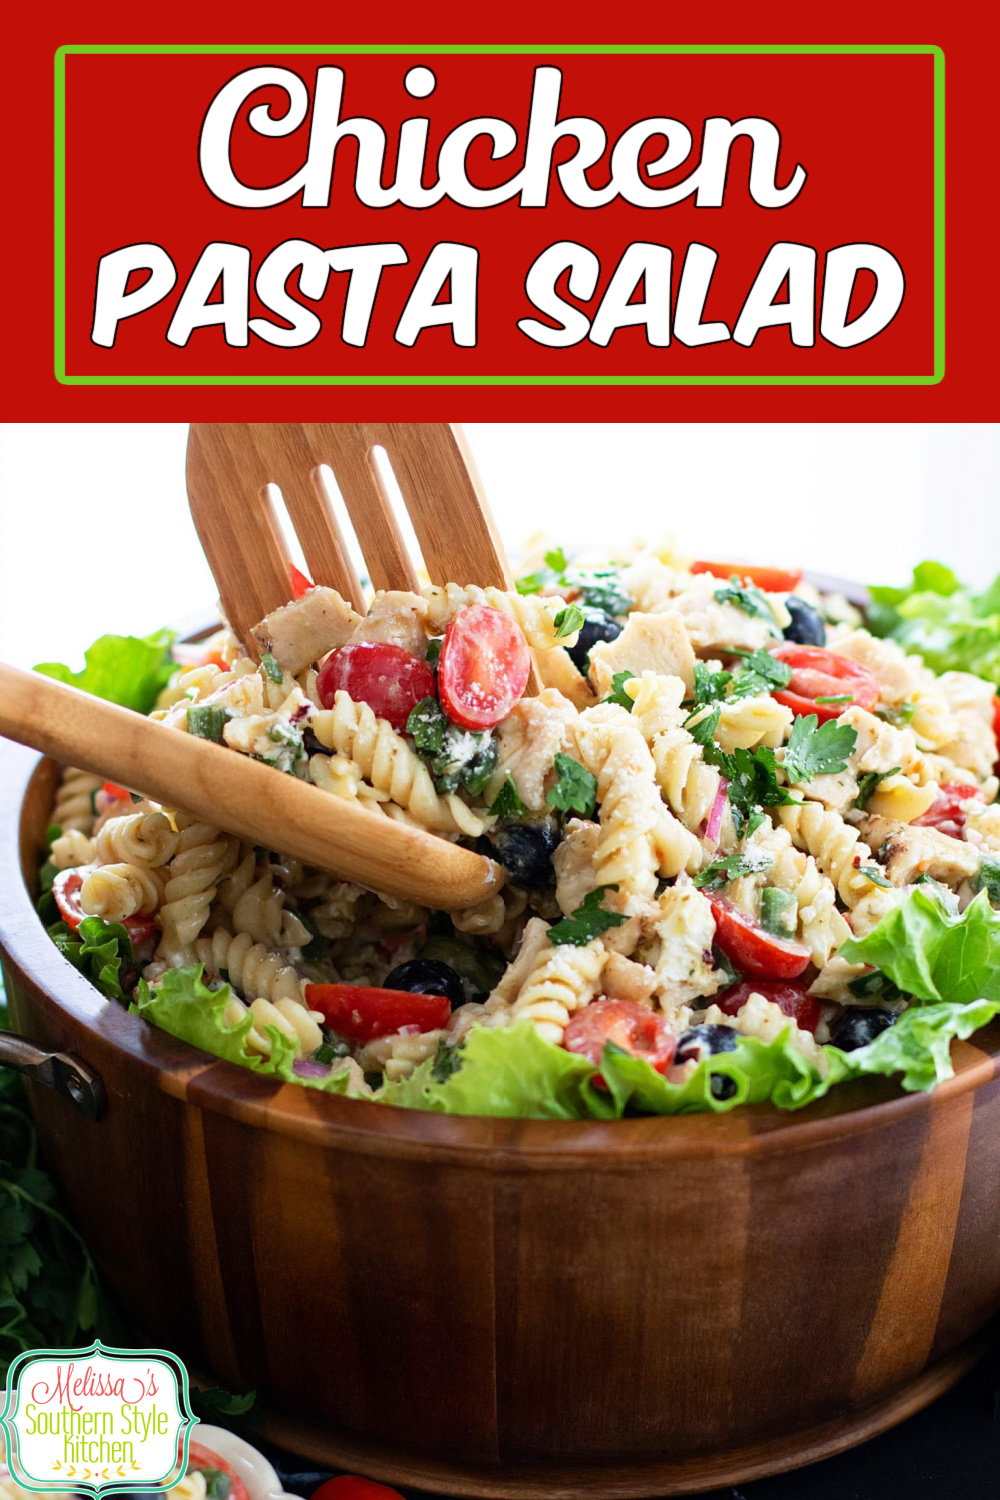 This Chicken Pasta Salad is filled with grilled chicken, chevre cheese and rotini pasta making it ideal for a family dinner or entertaining #pastasalad #chickenpastasalad #pastasaladrecipes #pasta #pastarecipes #grilledchicken #chickenrecipes #salads #southernrecipes via @melissasssk